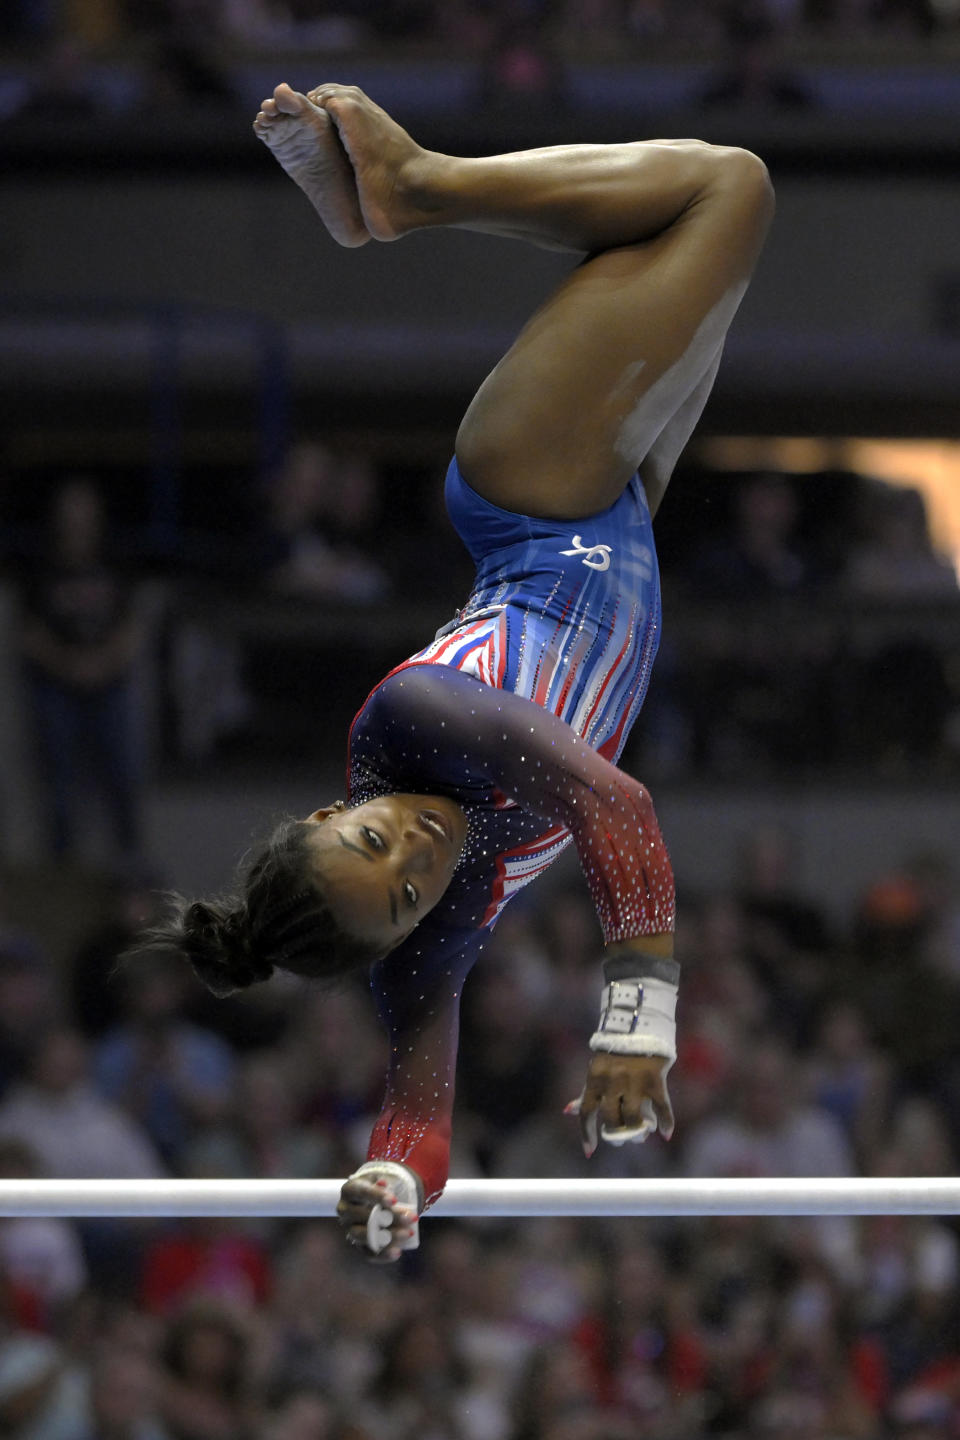 Simone Biles performs a handstand on uneven bars during a gymnastics competition, wearing a leotard with starry details